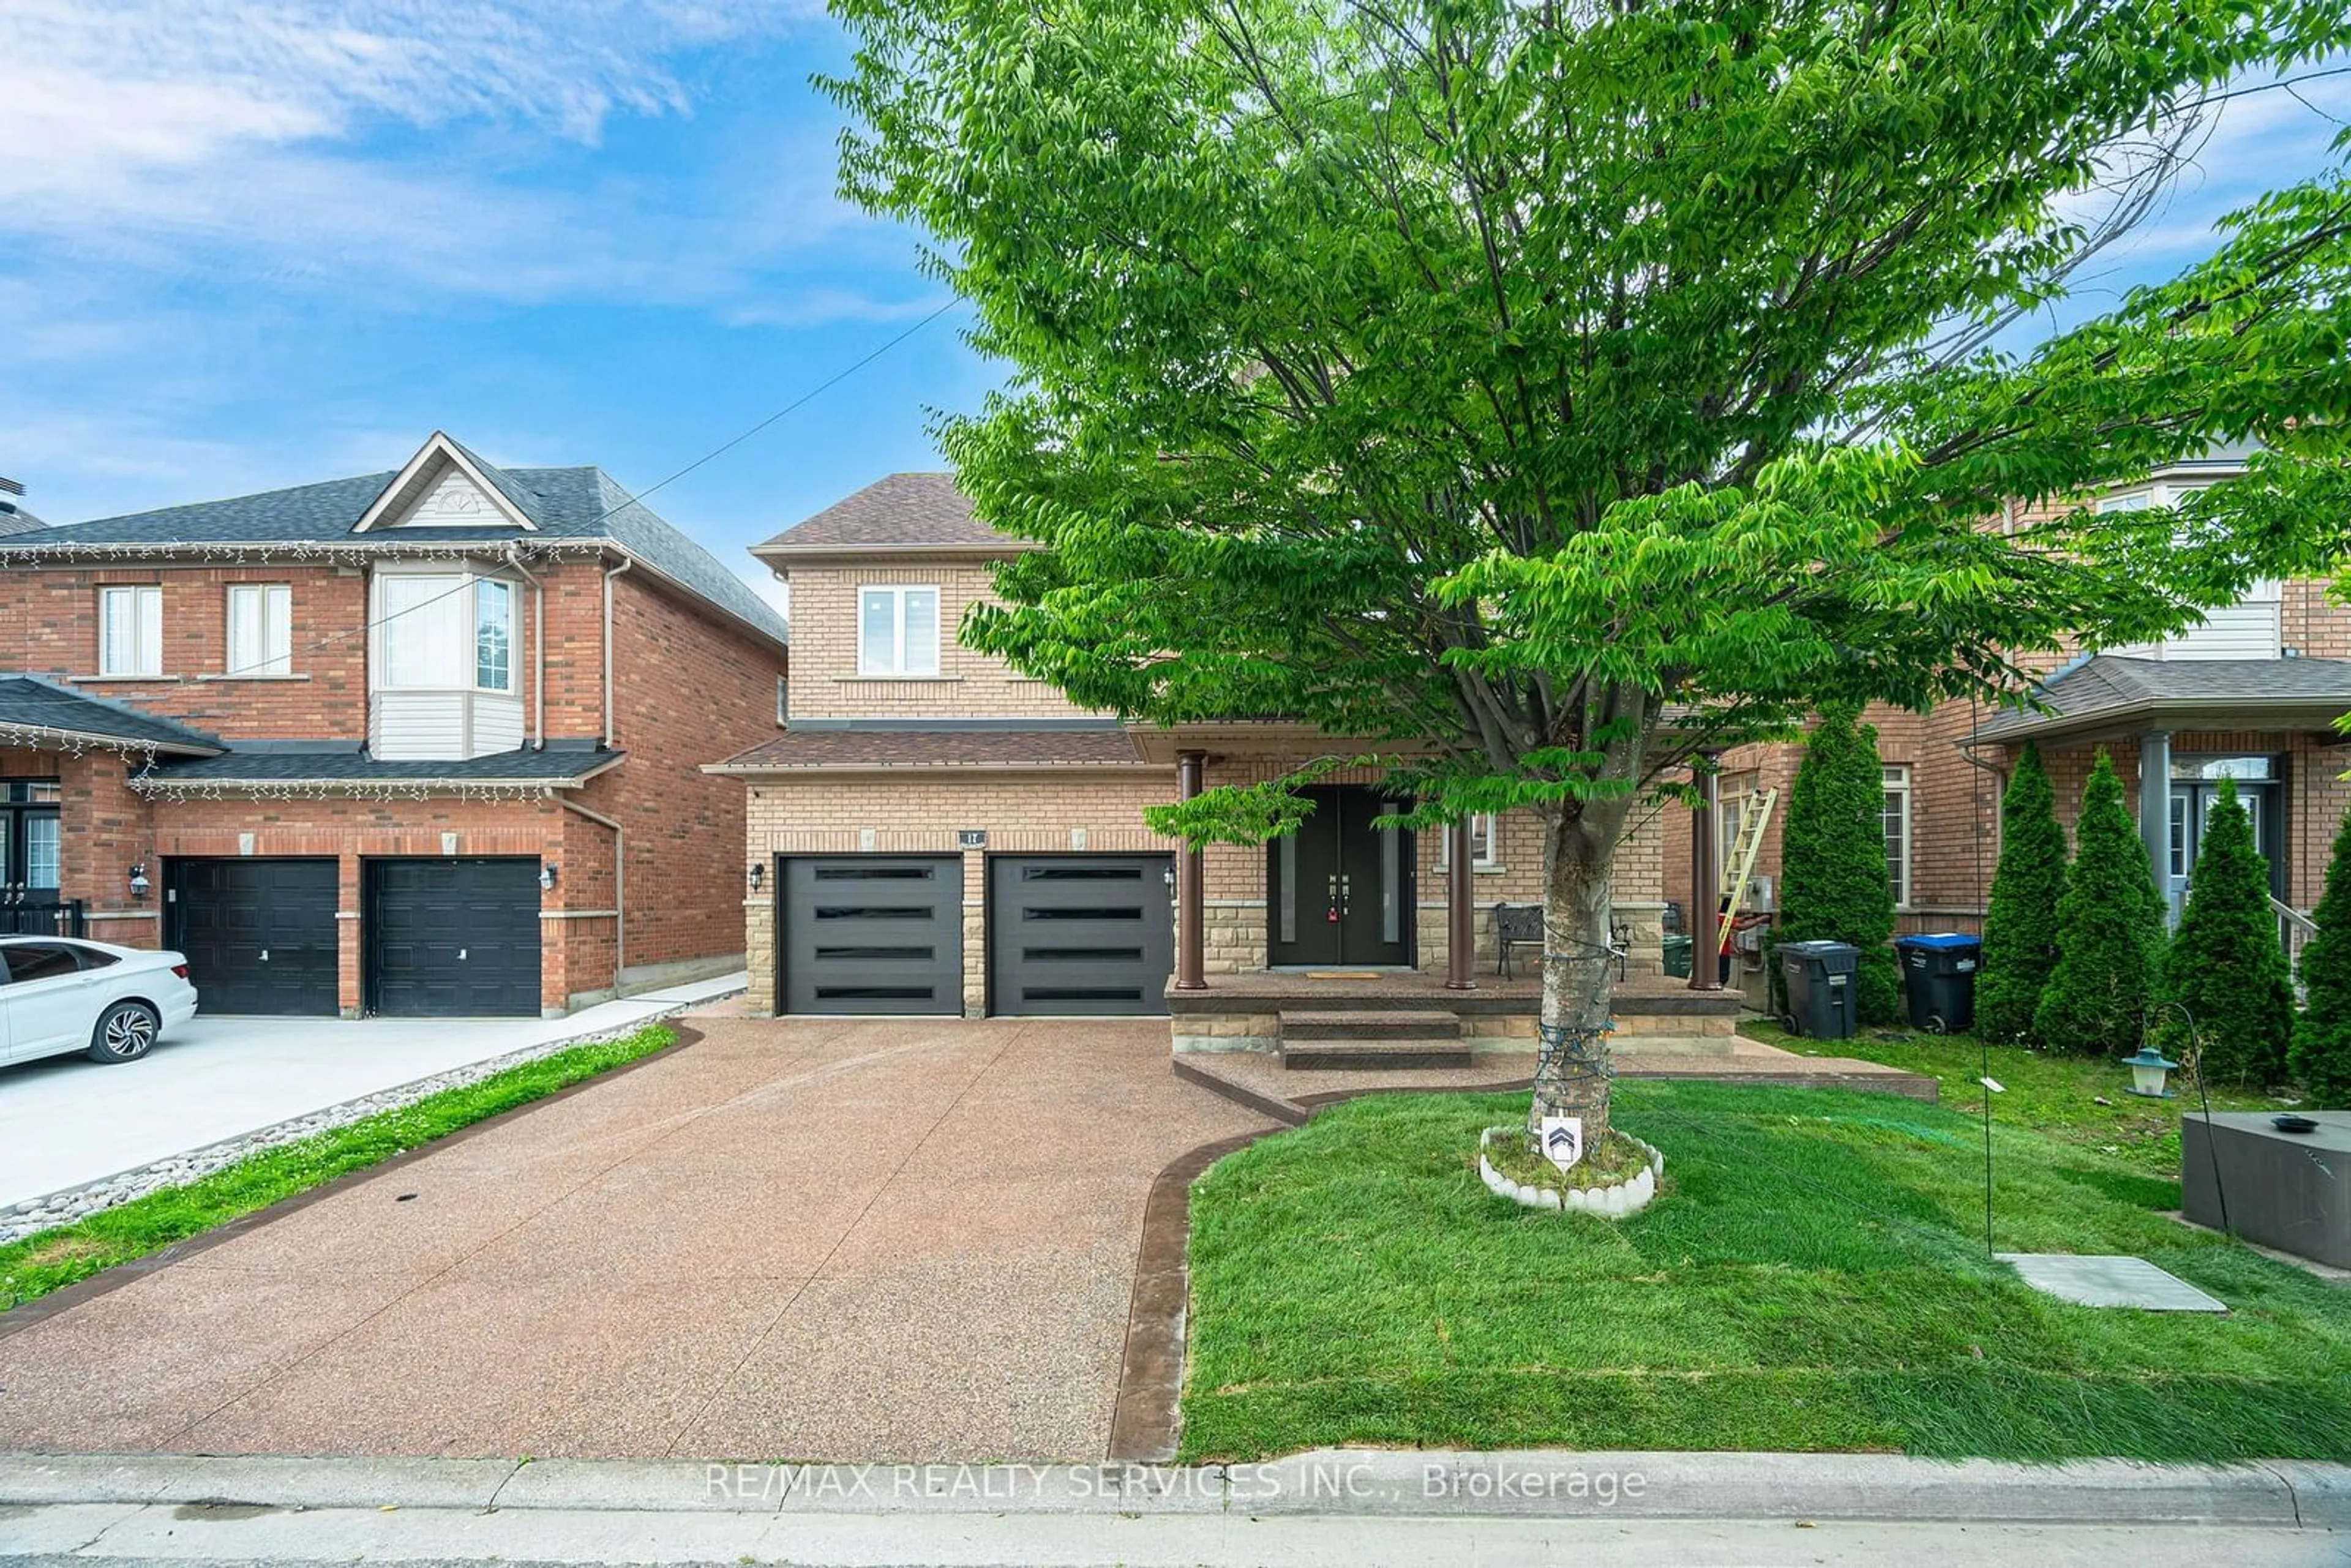 Home with brick exterior material for 17 Castle Mountain Dr, Brampton Ontario L6R 2W9